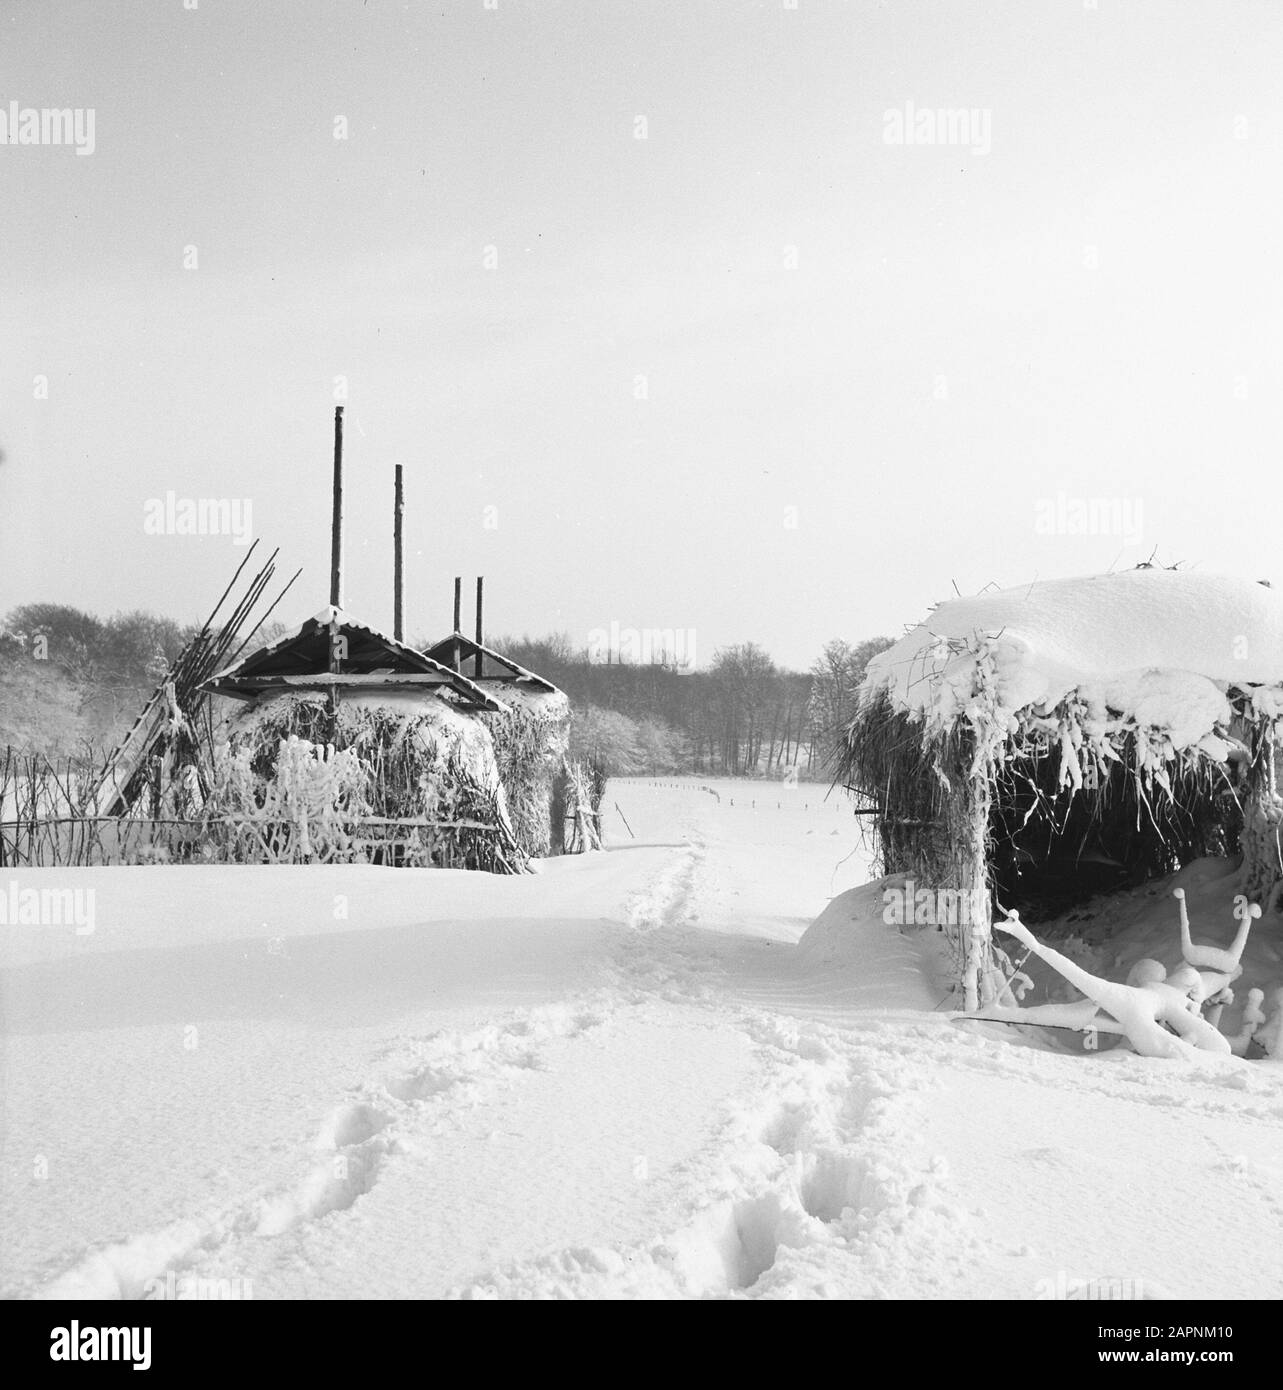 Park Zijpendaal in the winter. Hay mats under a thick snow cover Date: February 1958 Location: Arnhem Keywords: landscapes, natural beauty, parks, snow, winter, wild lands Stock Photo